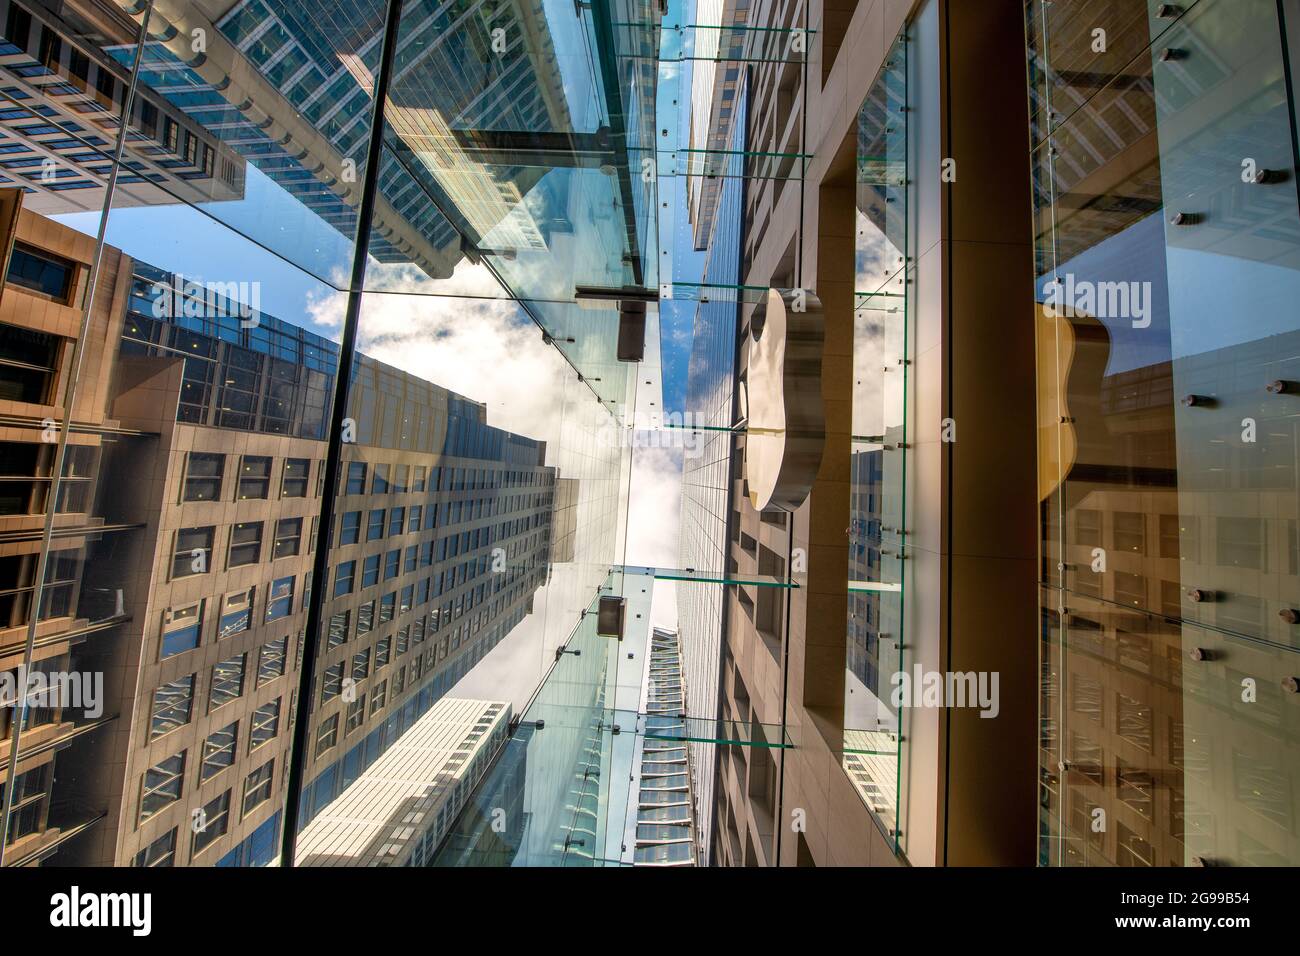 SYDNEY - AUGUST 19, 2018: Skyward view of Sydney Apple Store and skyscrapers in downtown Stock Photo